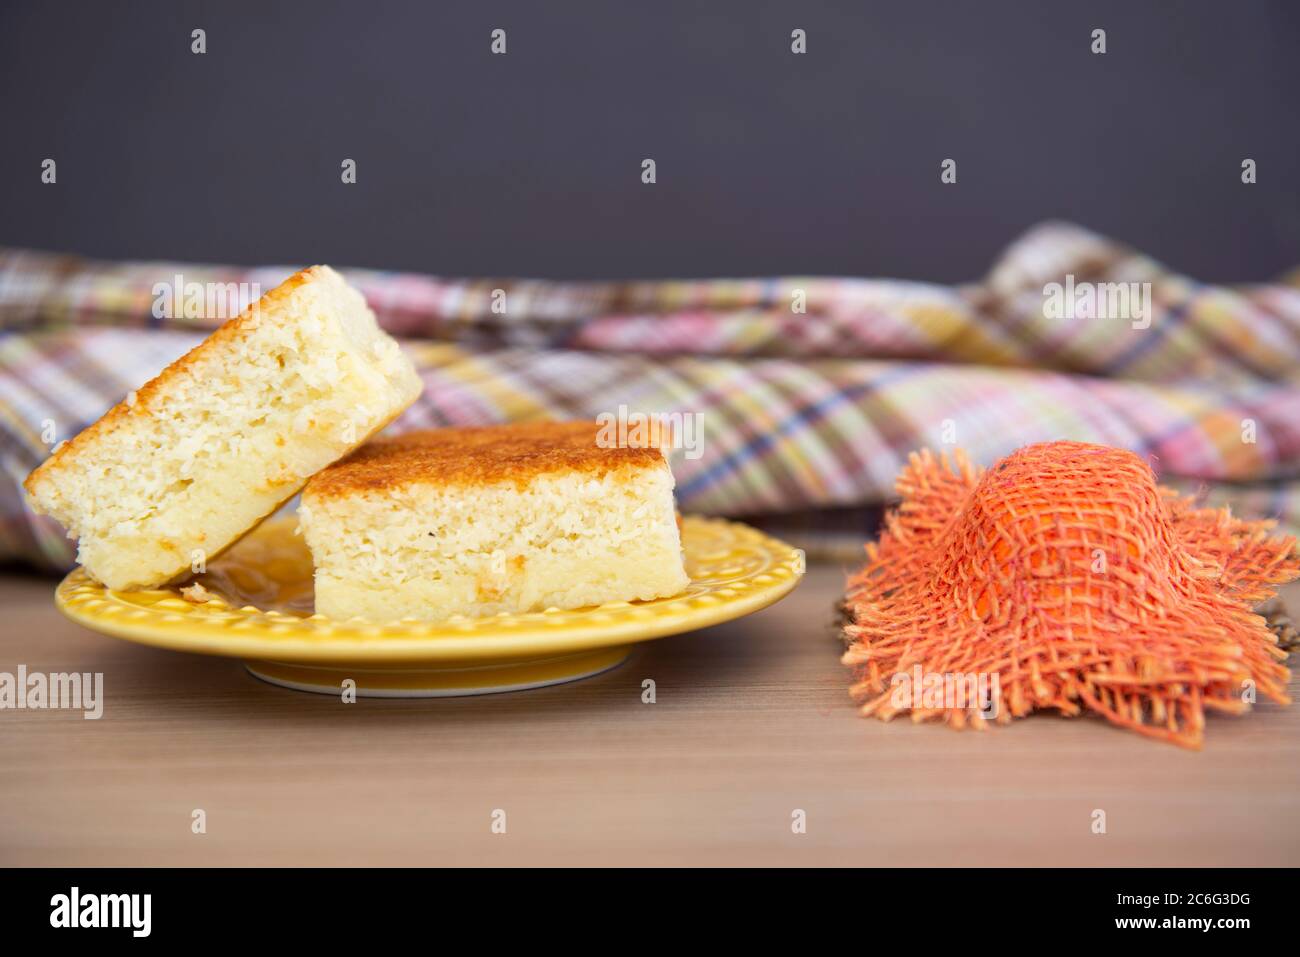 Typical June Party foods on a wooden table: Popcorn, cornmeal cake and a small country hat. Copy space. Selective focus. Stock Photo